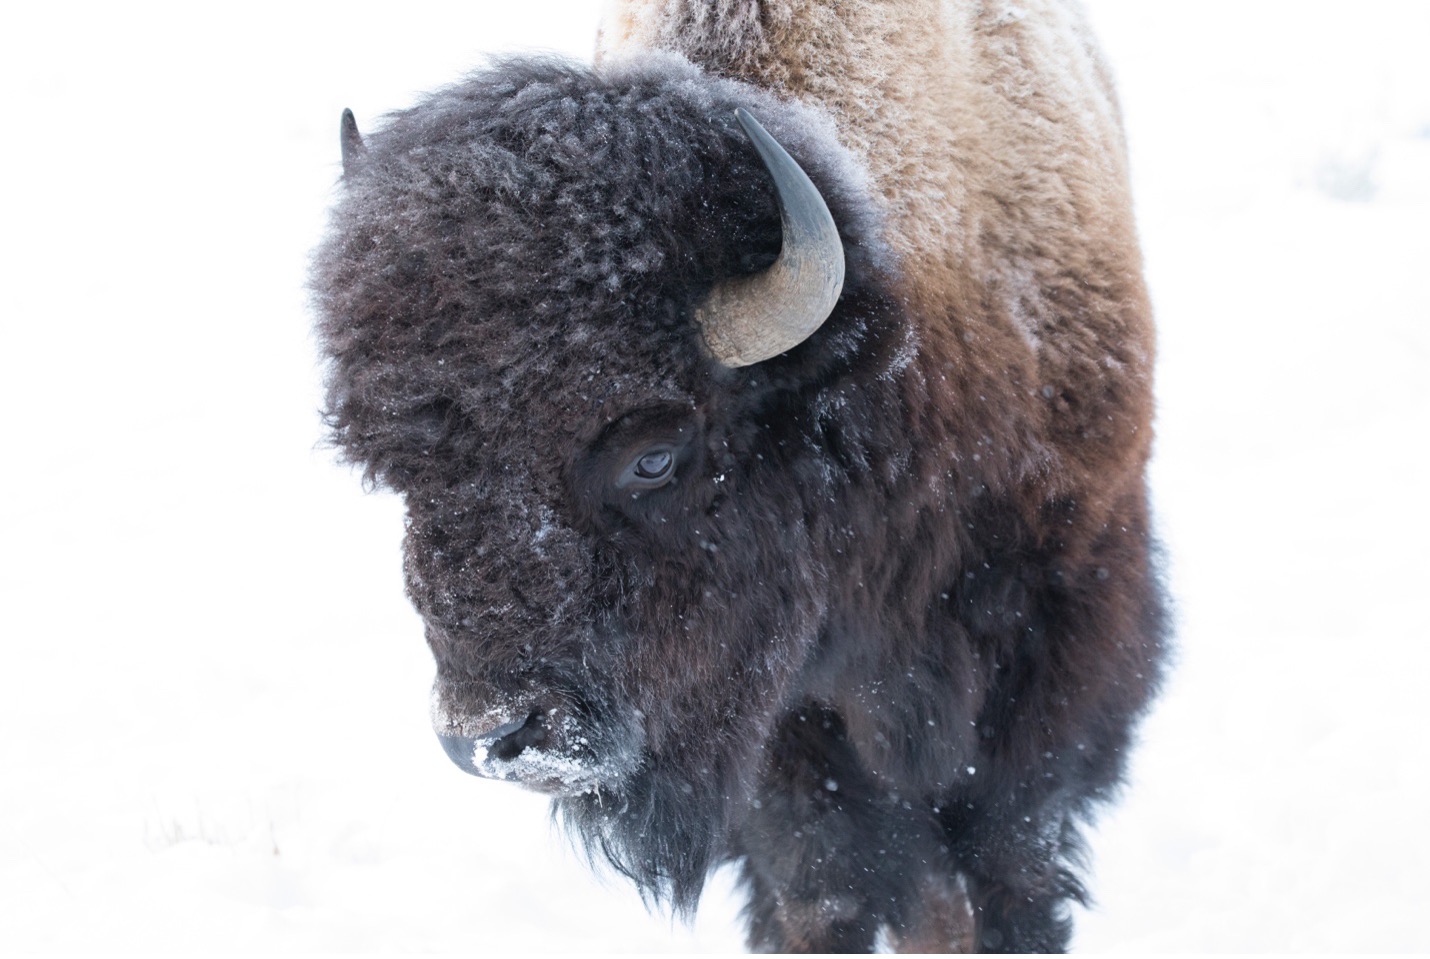 a bison appears against a snowy backdrop in yellowstone national park